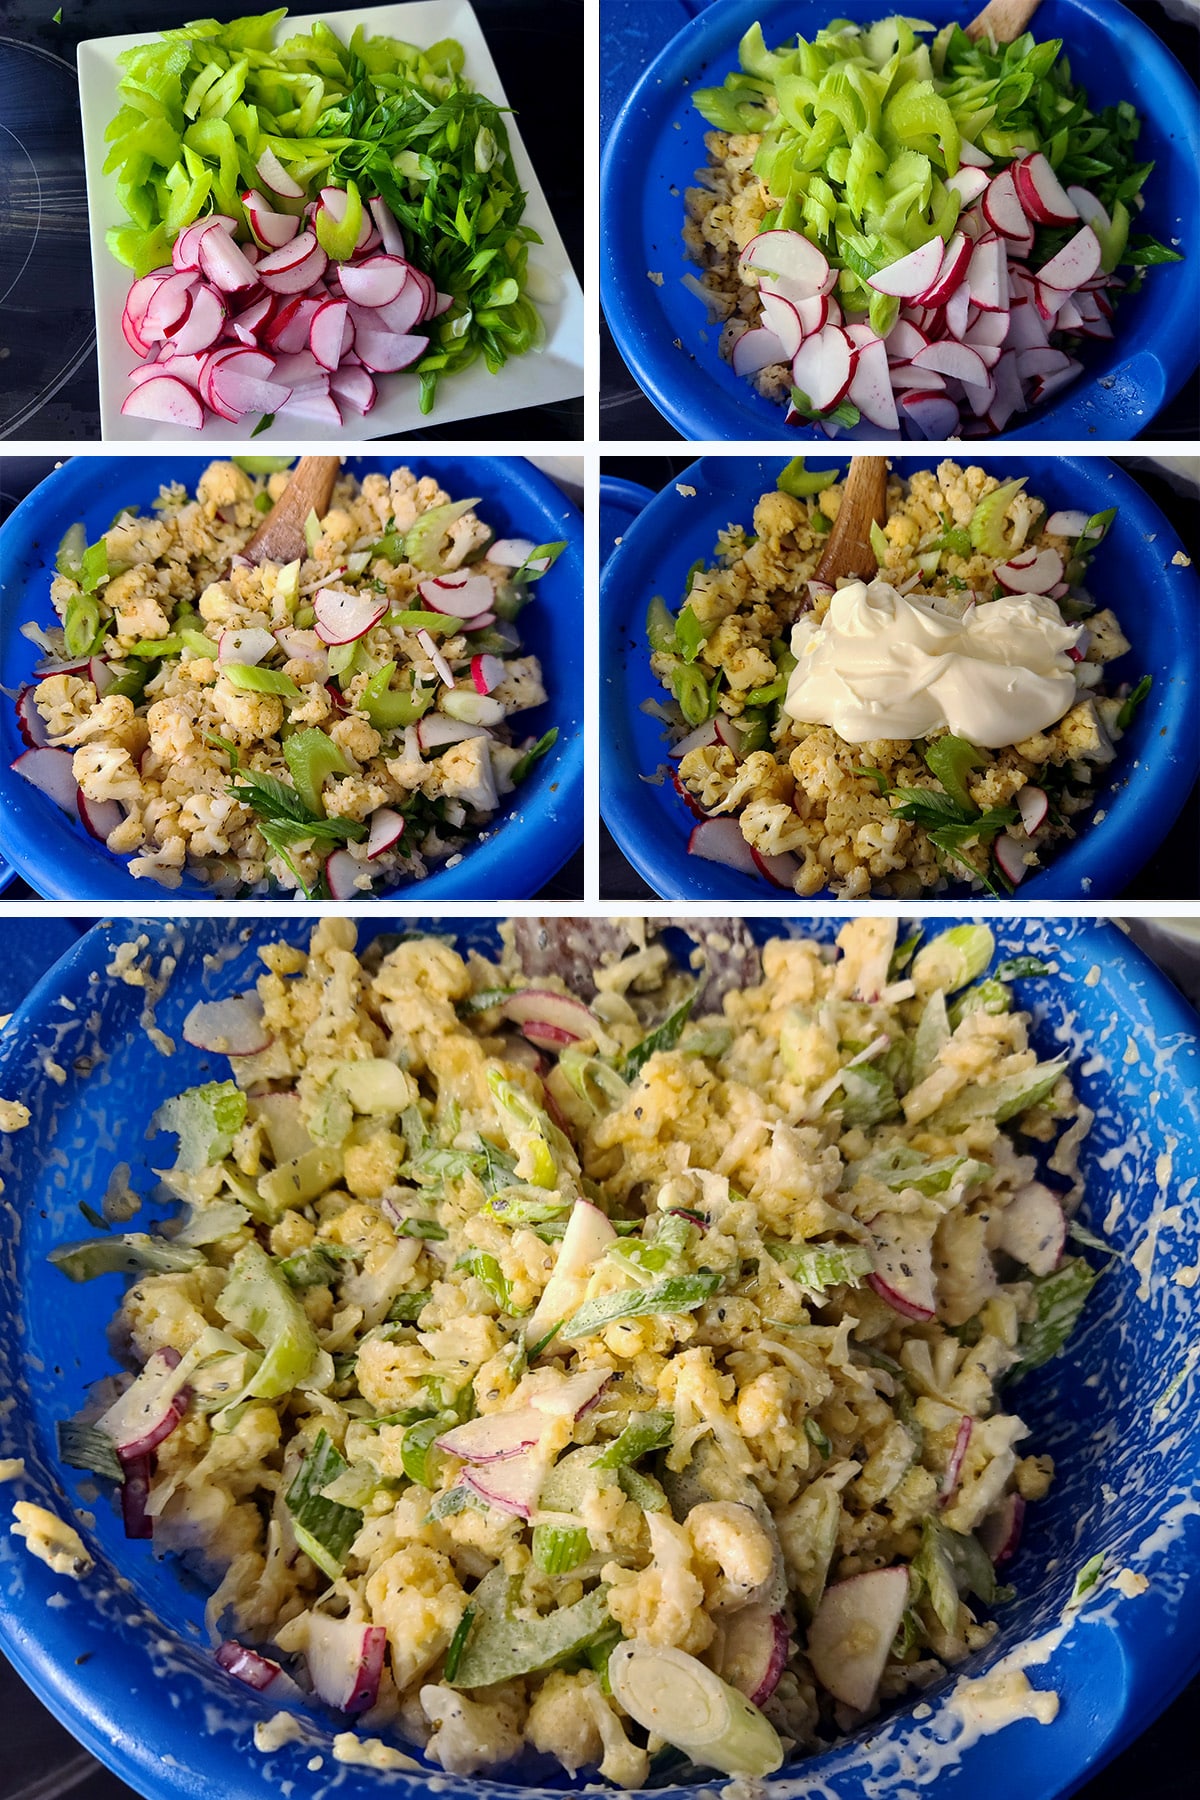 A 5 part image showing the vegetables and mayo being added to the bowl of faux potato salad.